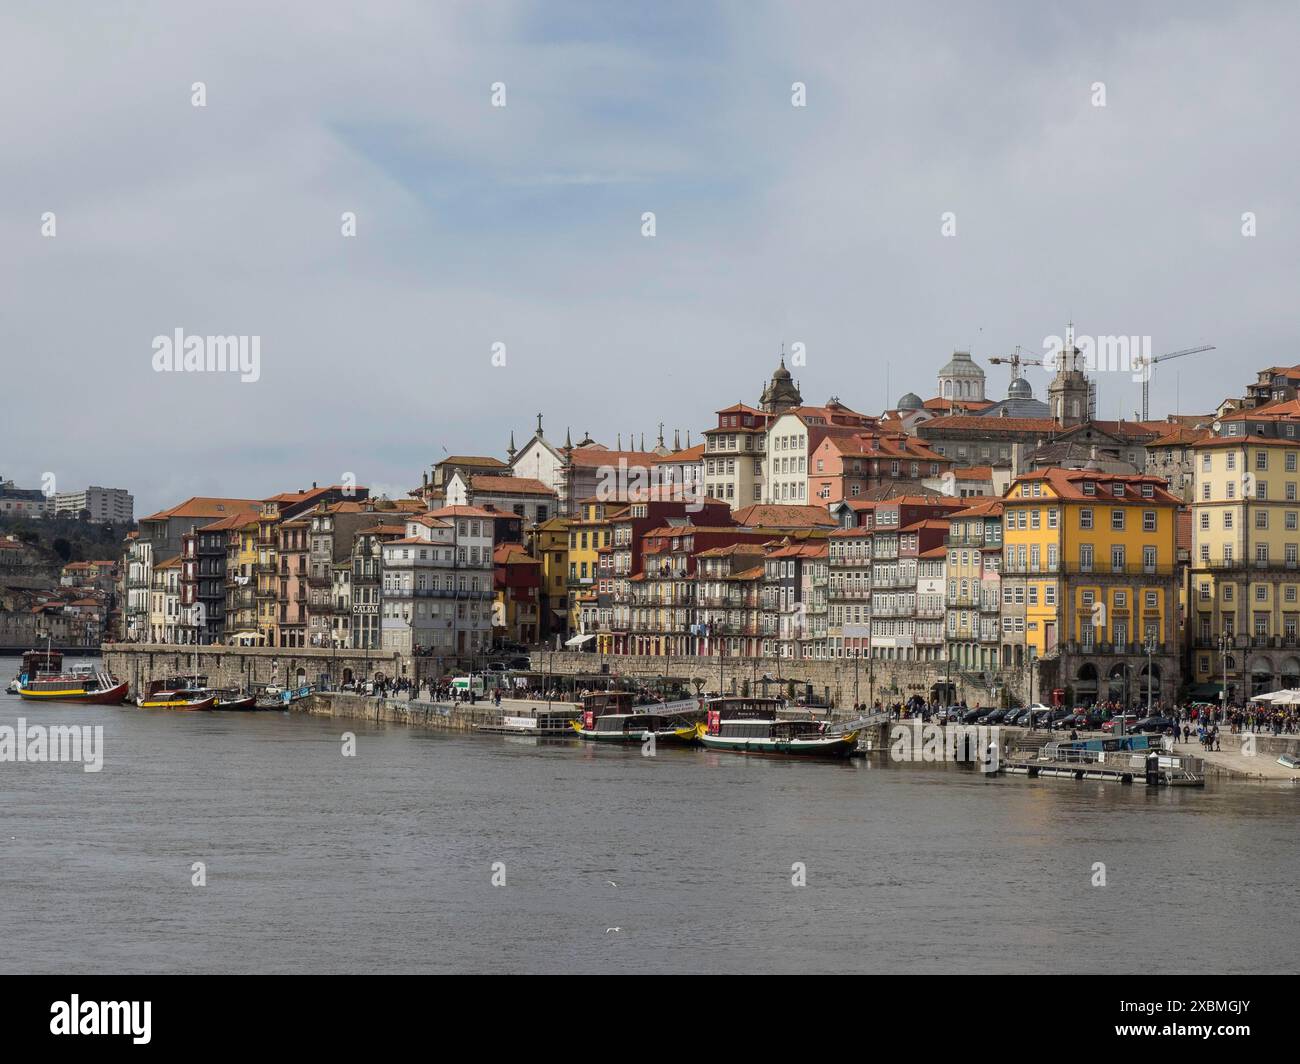 View of a riverside town with historic buildings and cloudy sky, yellow and red colours dominate the scene, Porto, Douro, Portugal Stock Photo